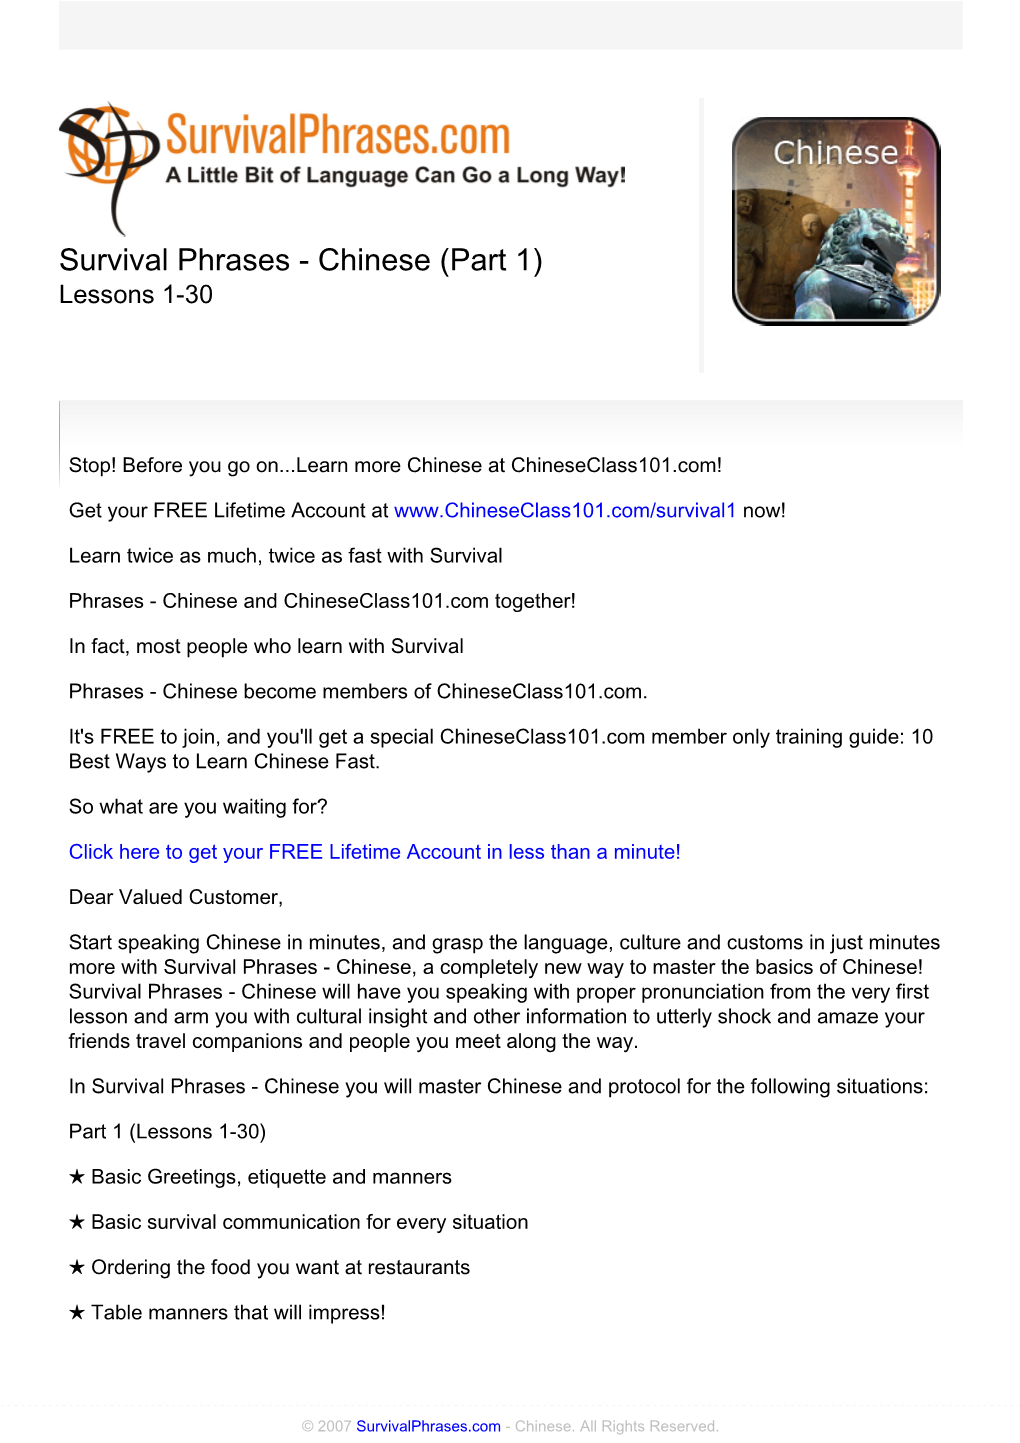 Survival Phrases - Chinese (Part 1) Lessons 1-30